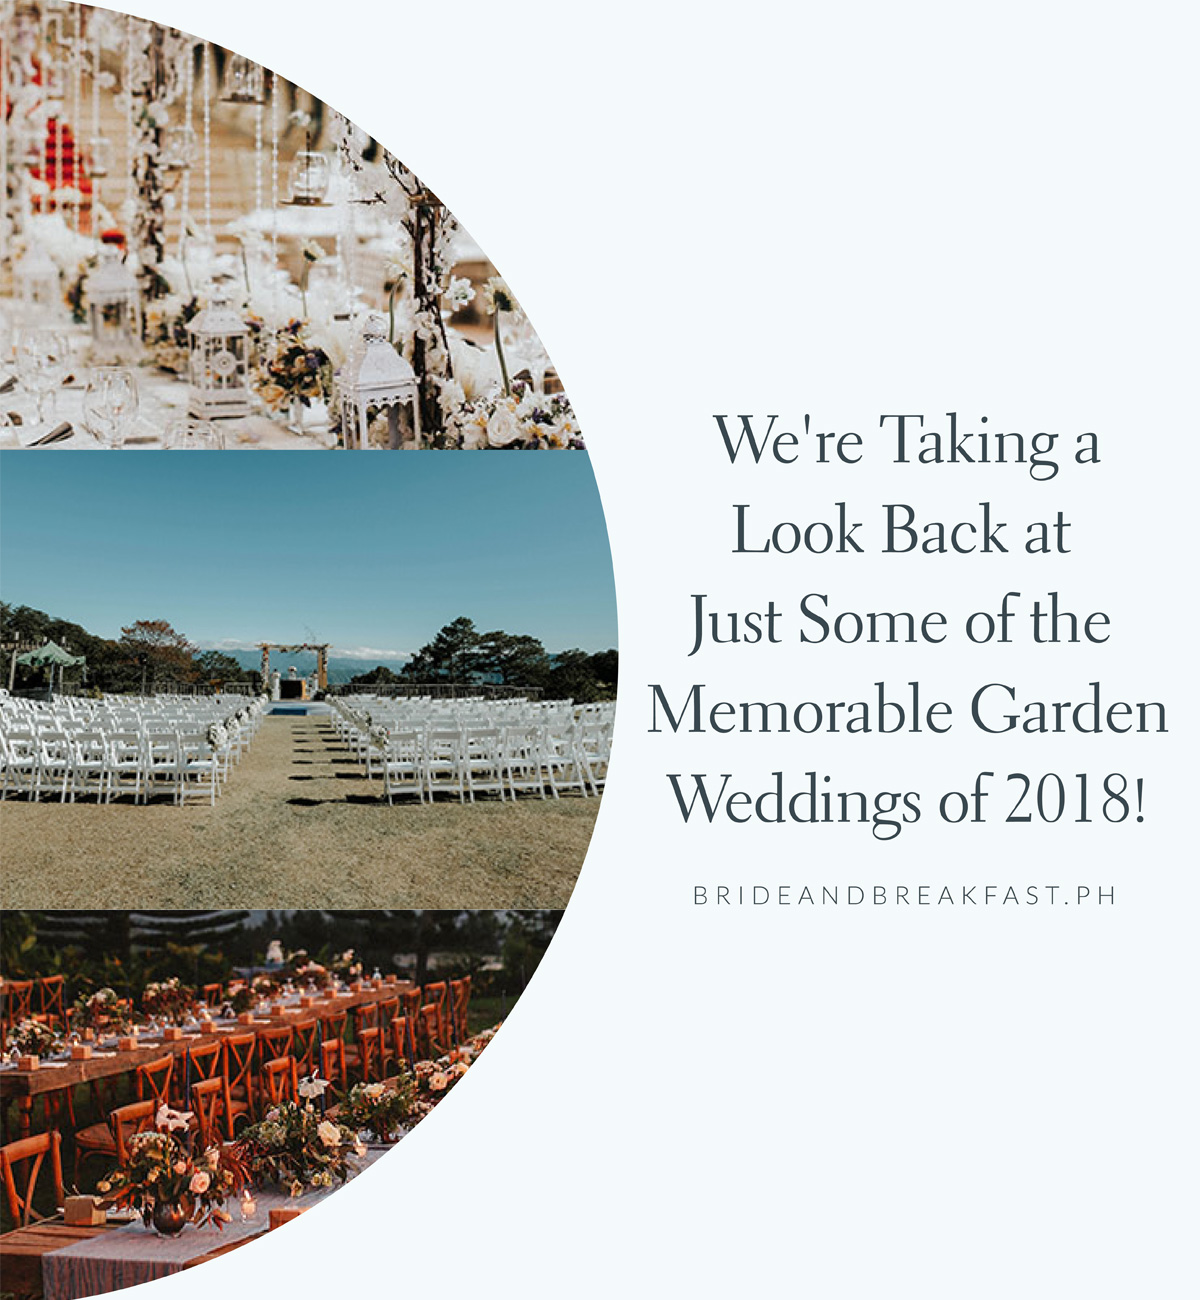 We're Taking a Look Back at Just Some of the Memorable Garden Weddings of 2018!